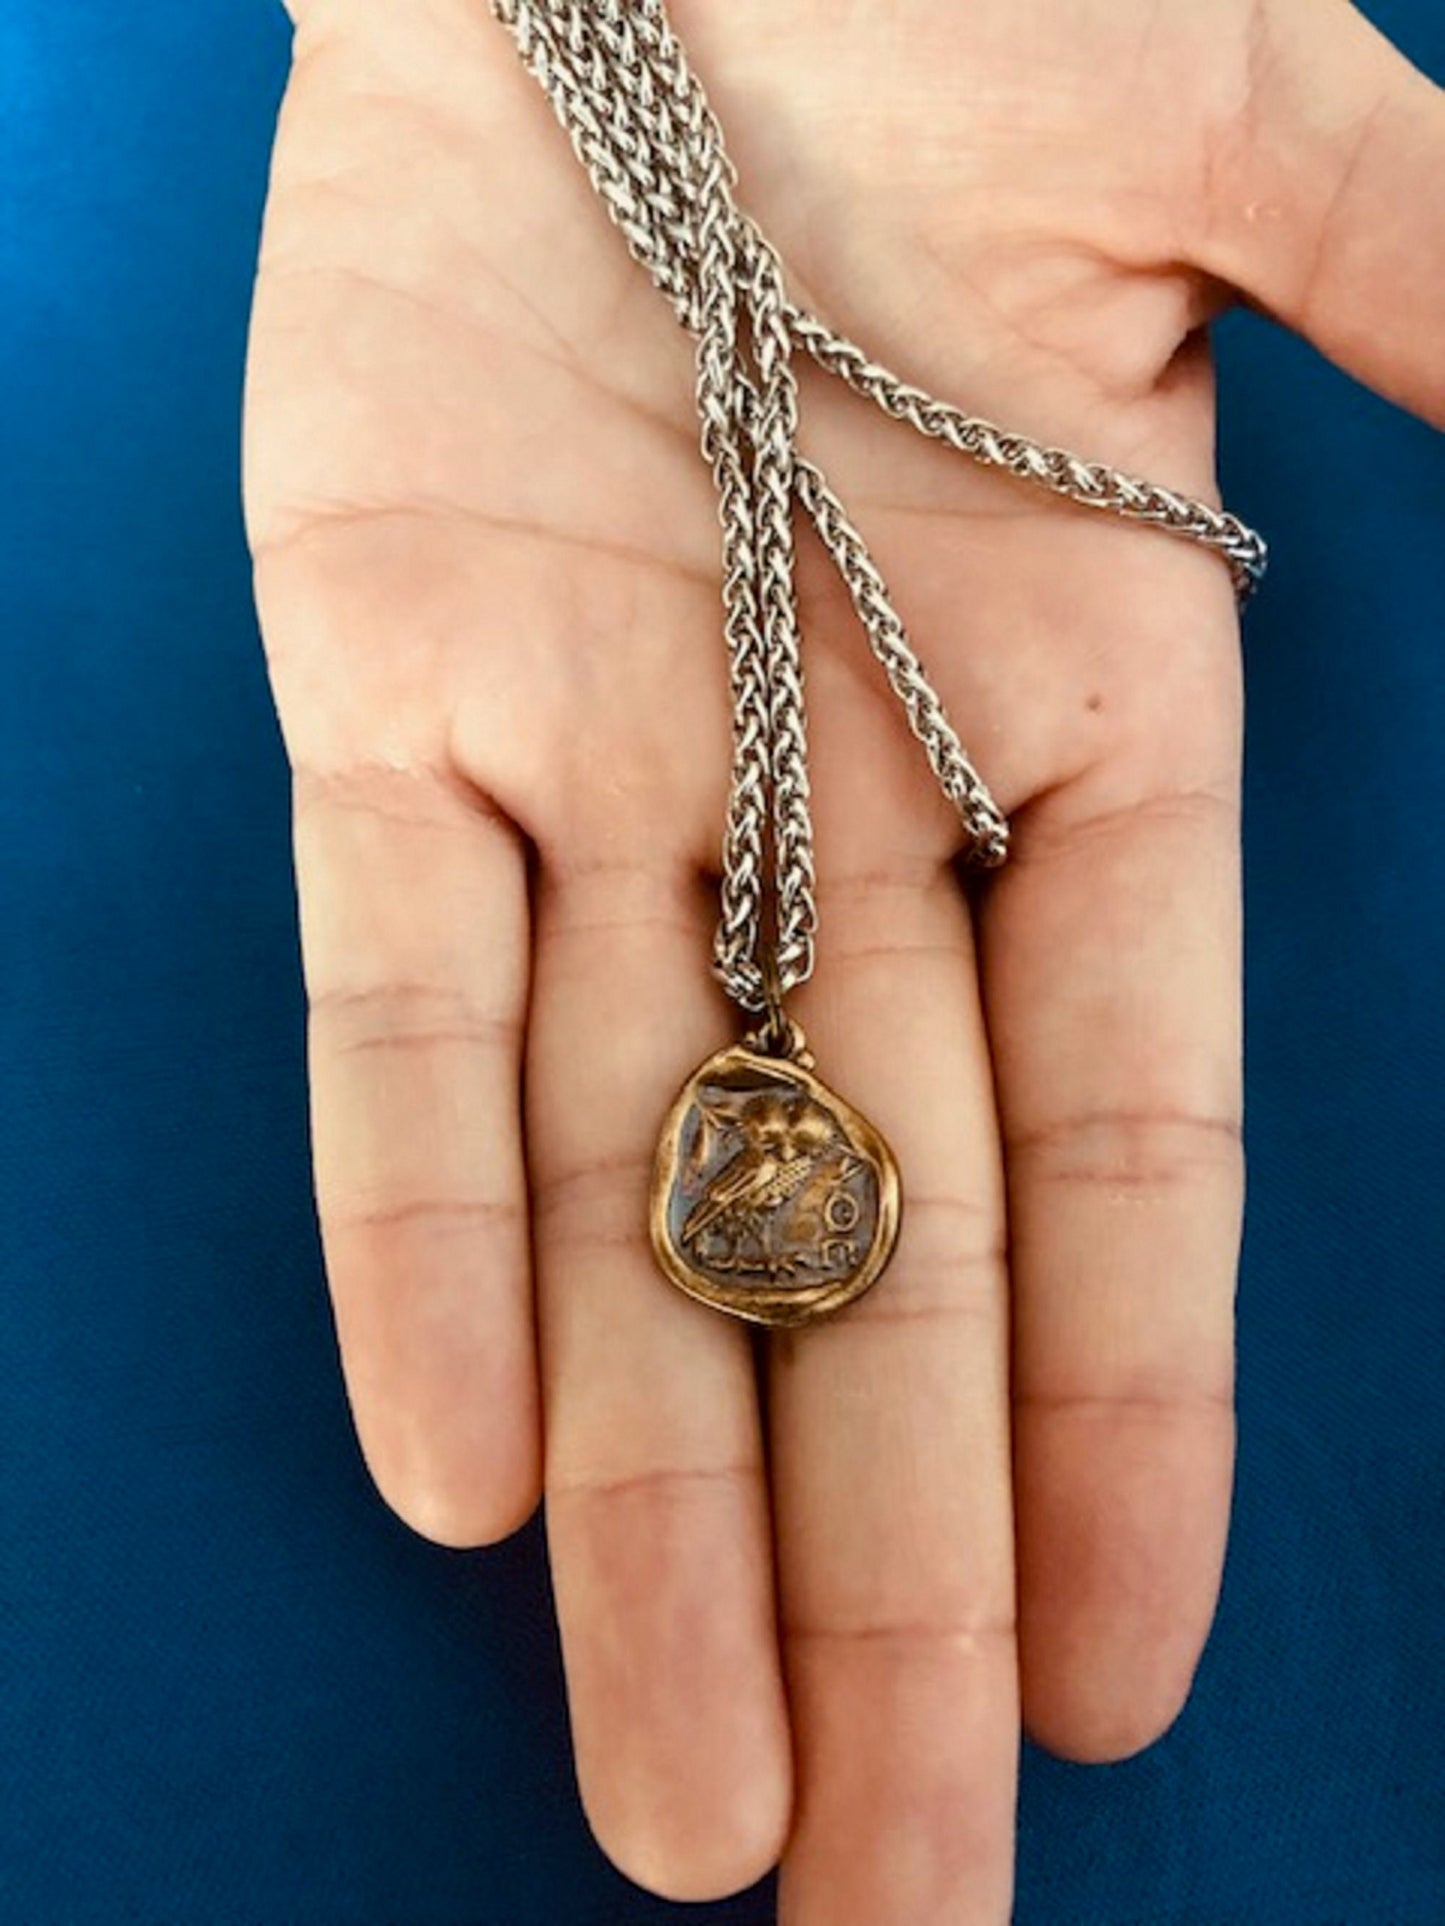 Wax Seal Antique Bronze Owl Pendant - Prudence, Wisdom, and Wit - Jewelry from an Antique Wax Seal - Charm Fascinations 122